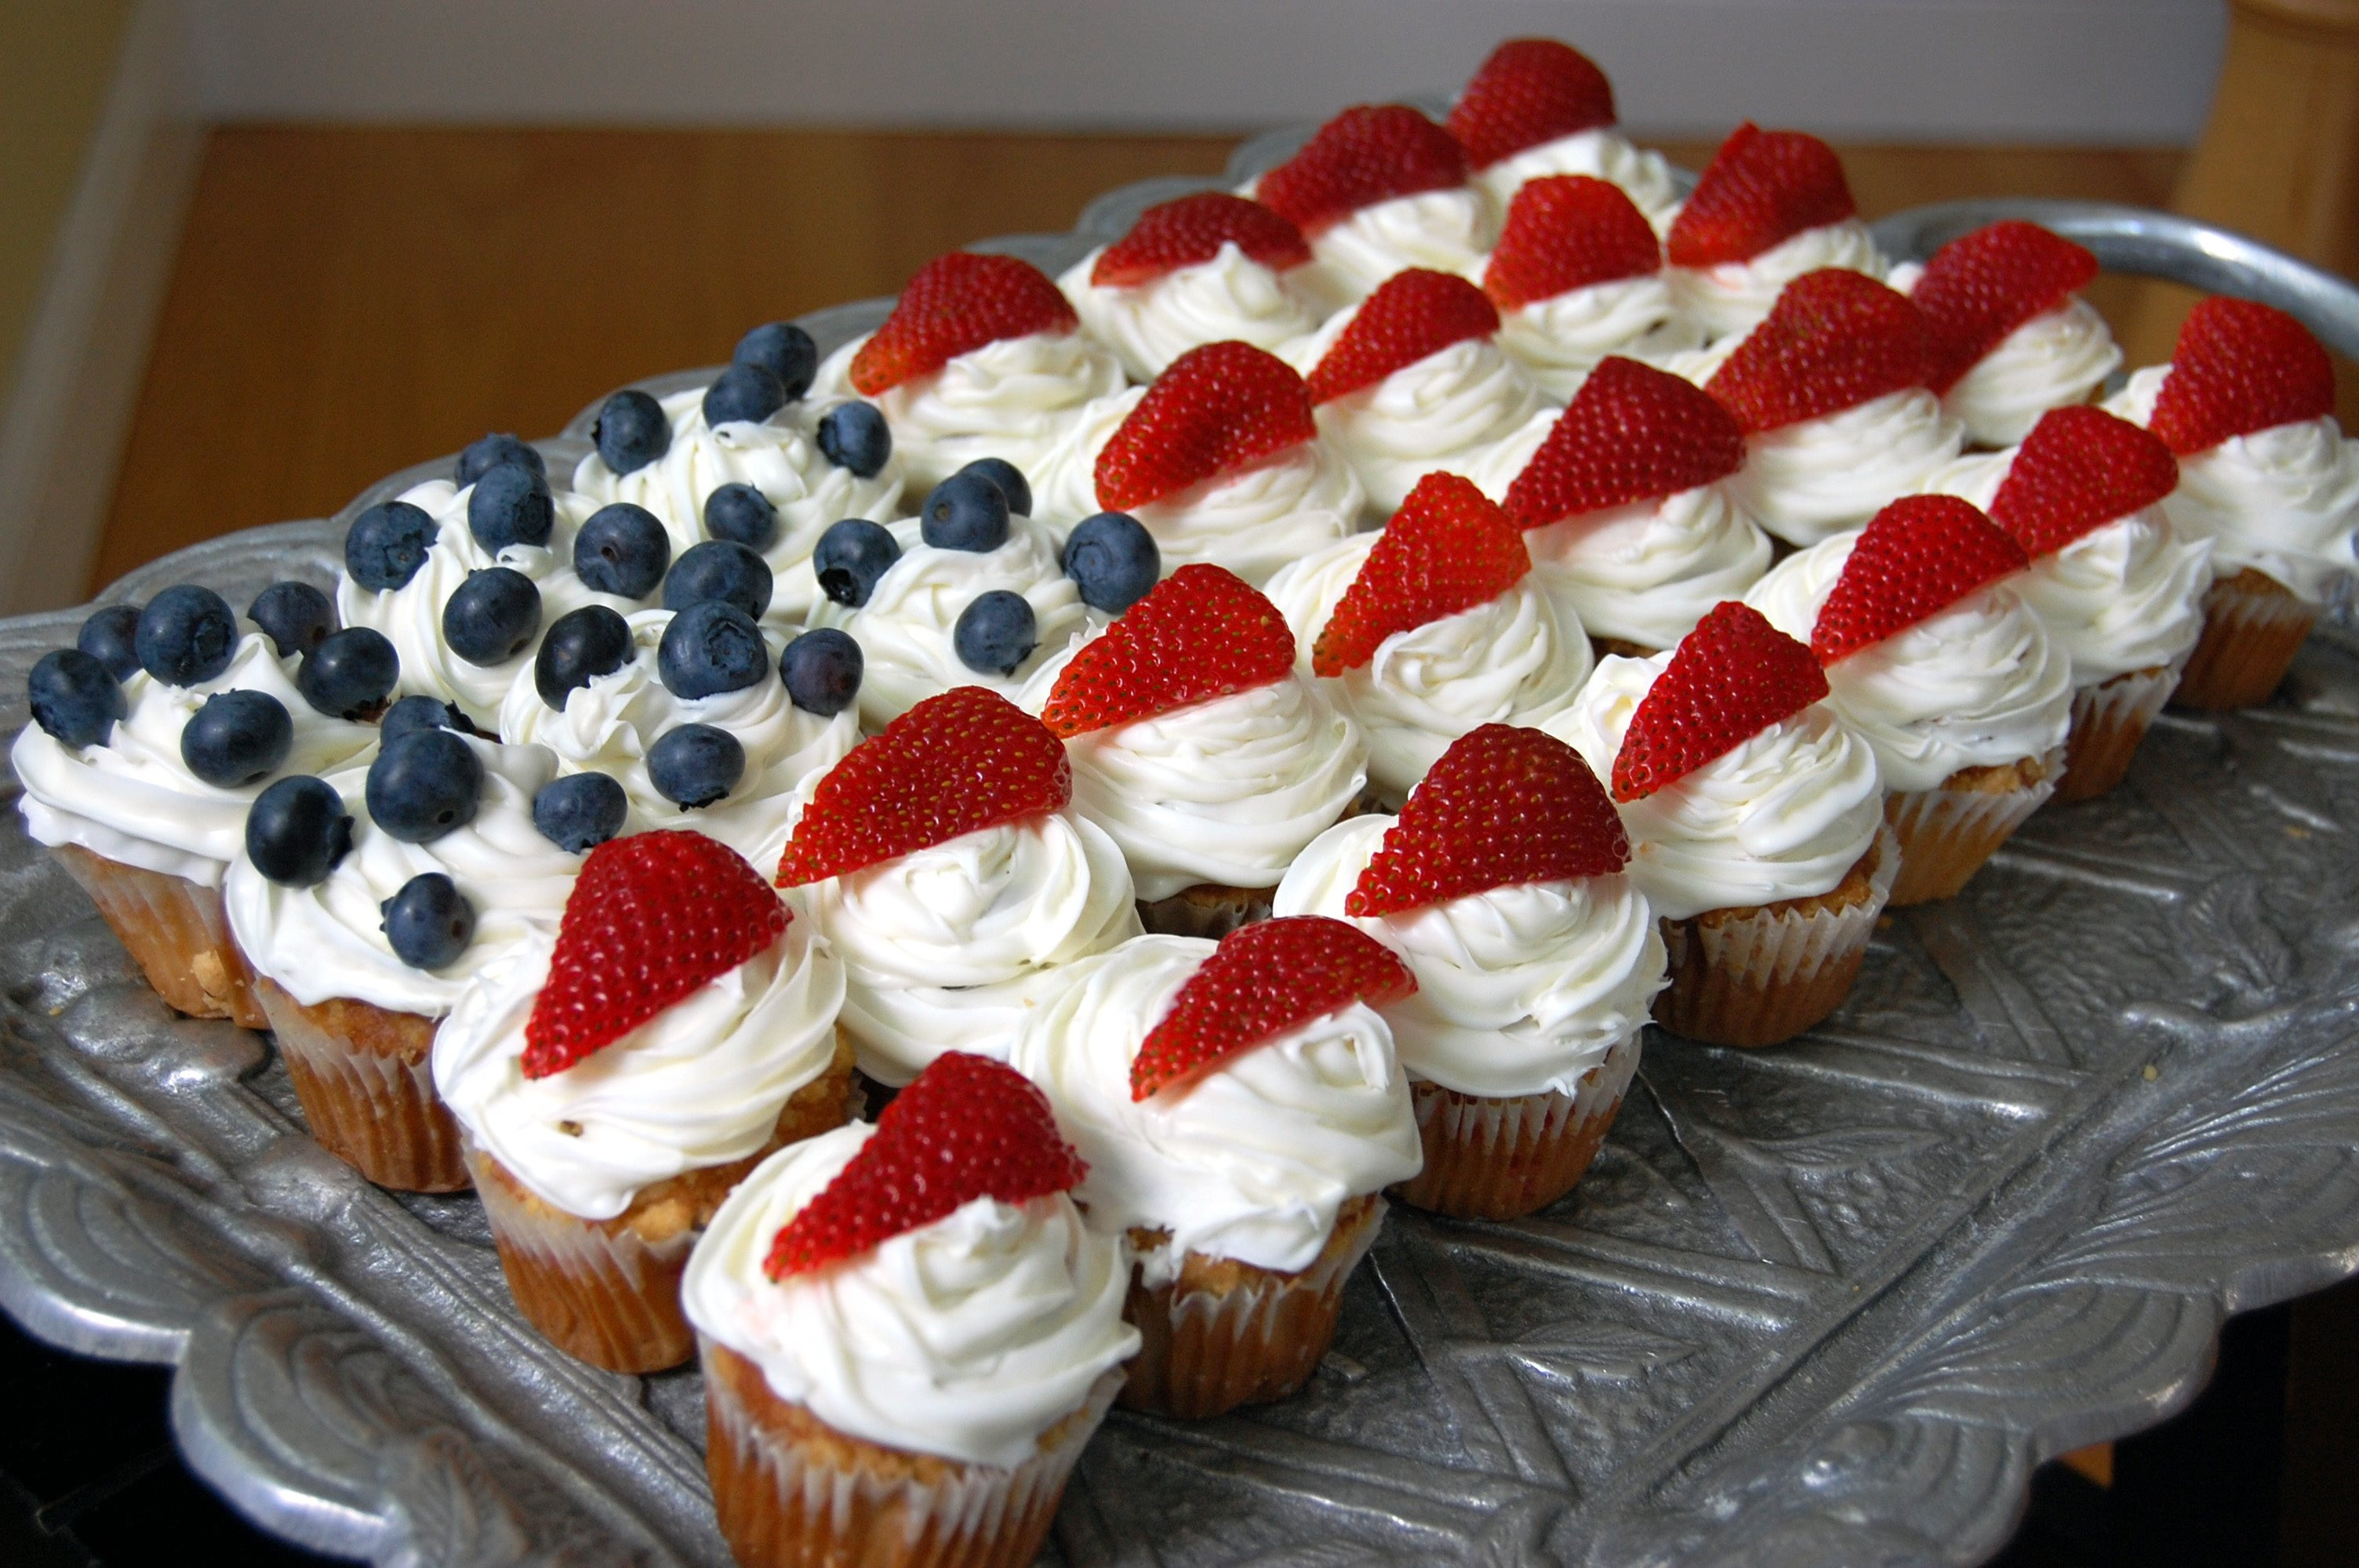 4Th Of July Cake Recipes
 20 Lazy Yet Super Awesome 4th of July Ideas Gluten Free